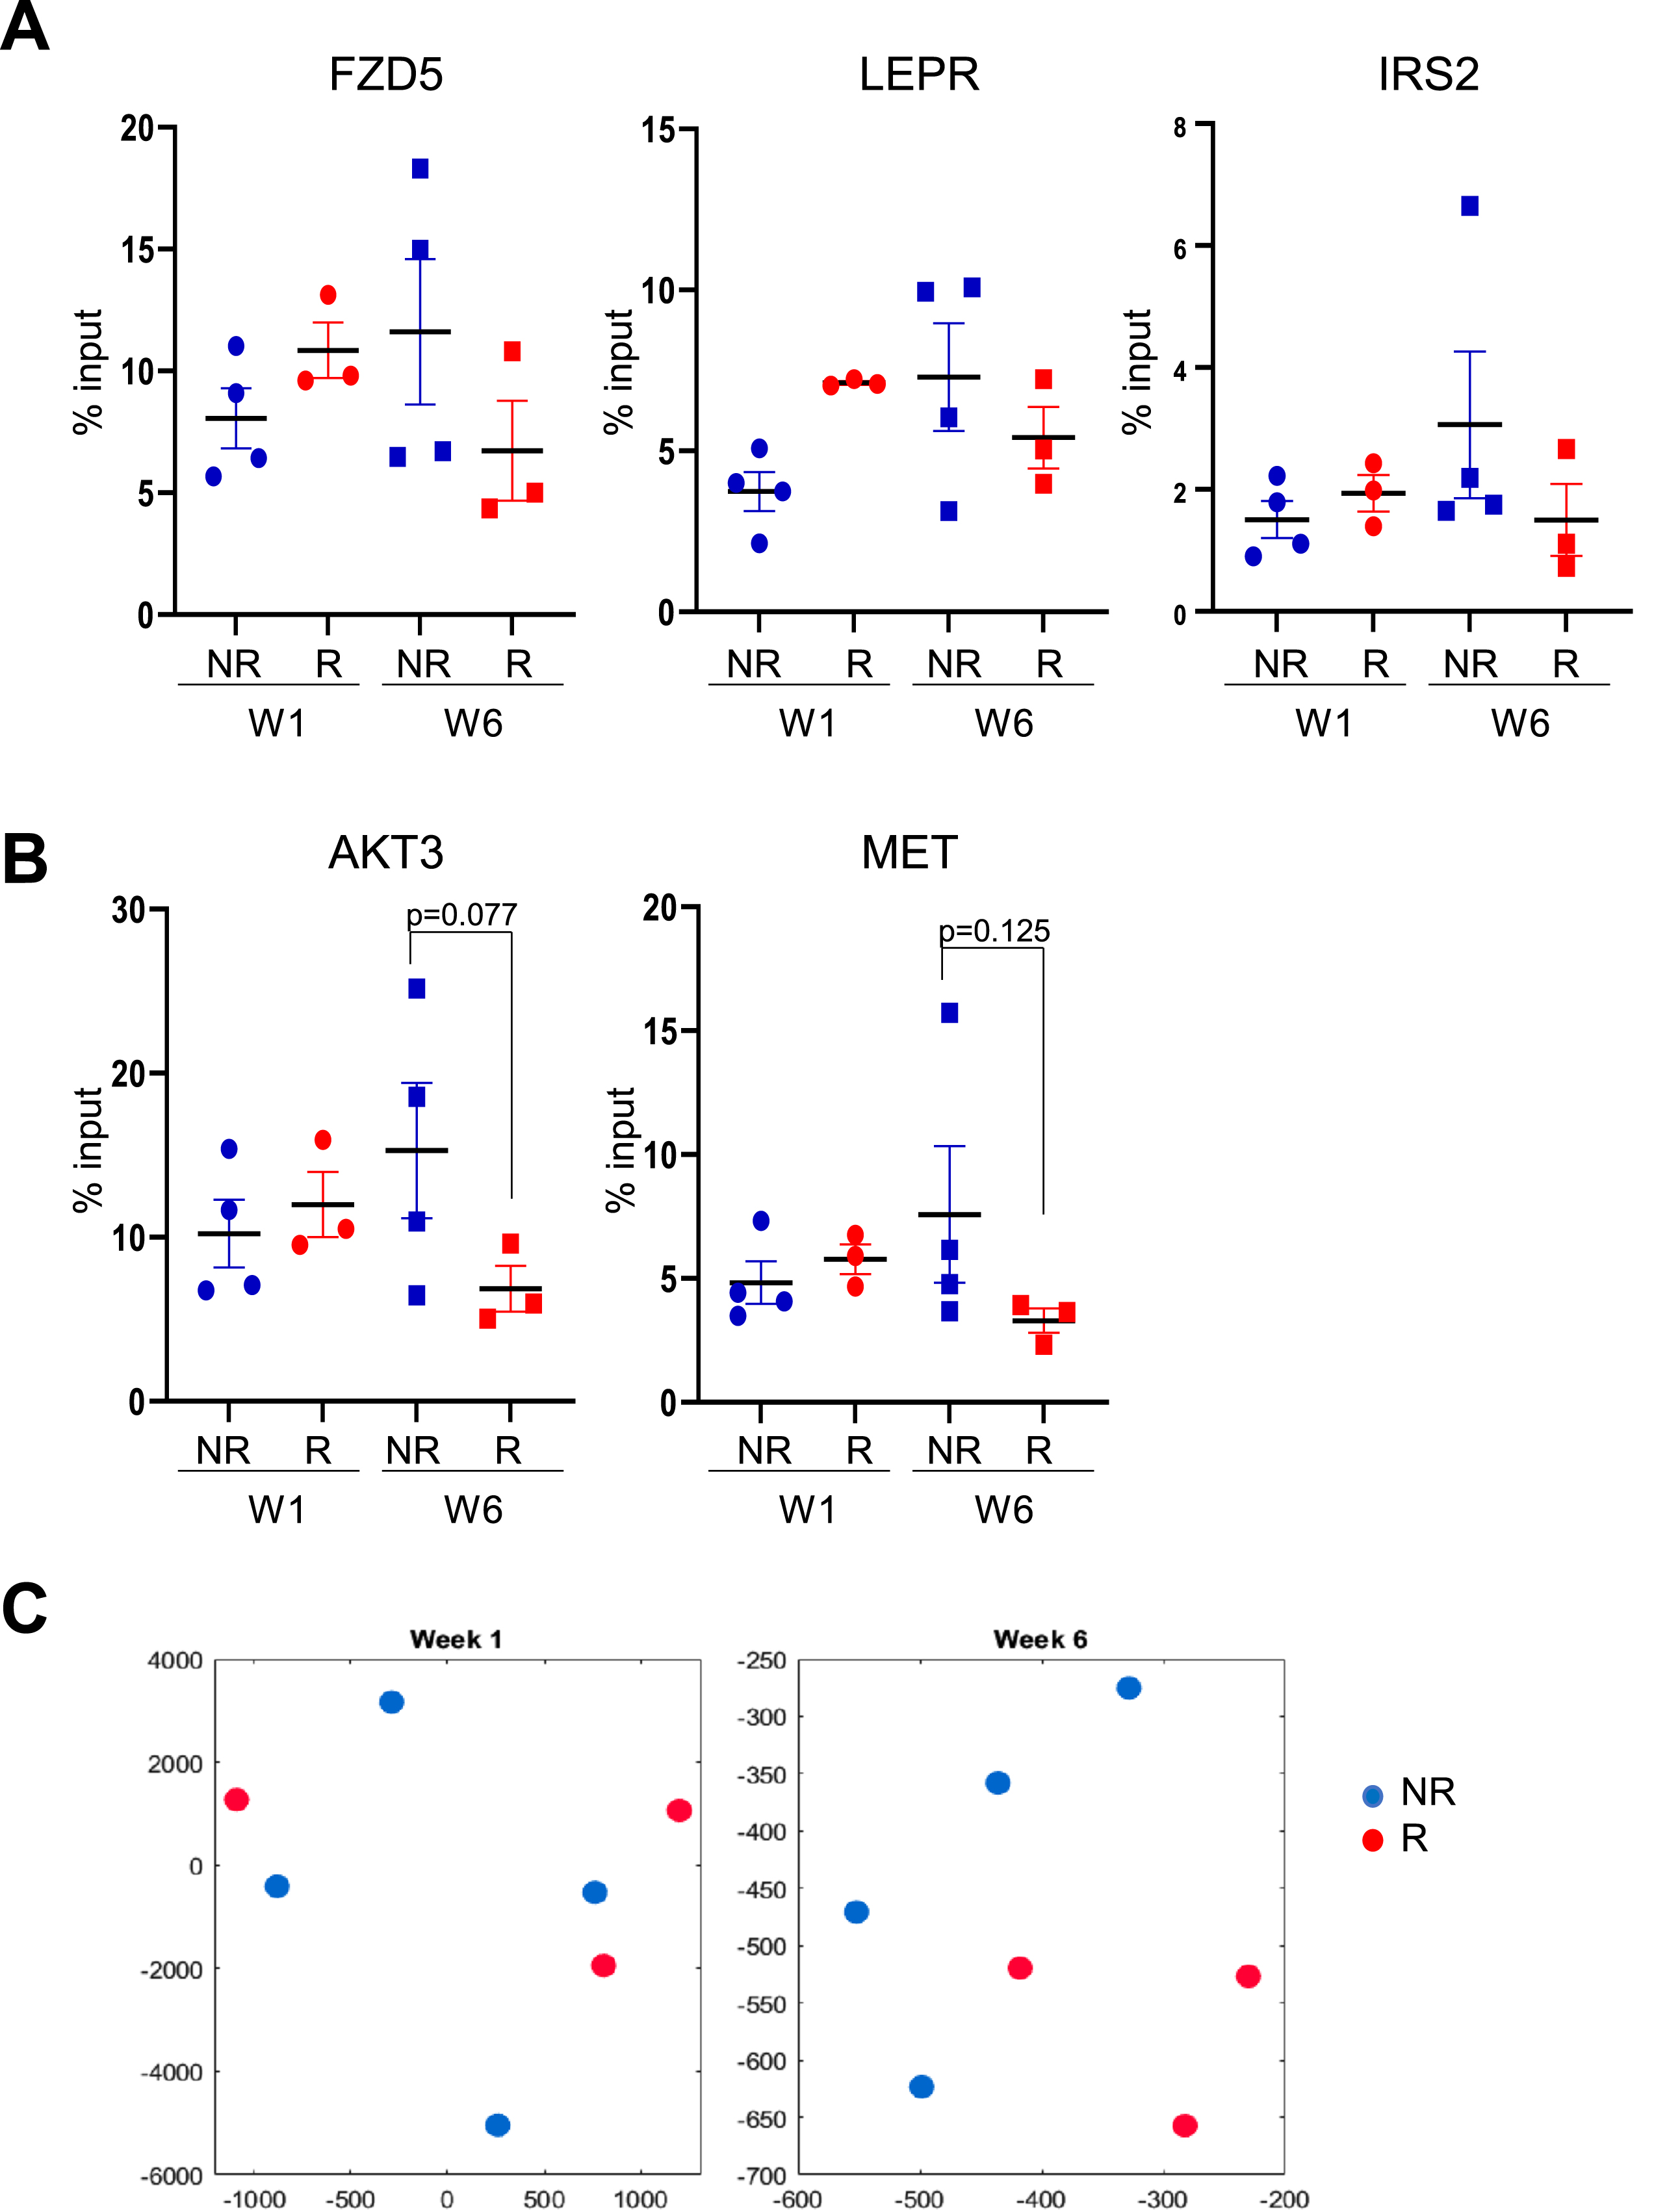 Methylation levels on monocytes from an independent validation cohort of patients at gene promoters previously identified as enriched in the original group of patients without early disease recurrence. A) H3K4me3 in monocytes at gene promoters for FZD5, LEPR and IRS2 genes. B) H3K4me3 in monocytes at gene promoters for AKT3 and MET genes. C) Two-dimensional t-SNE embeddings of ChIP-qPCR data from monocytes of a validation cohort at week one (left panel) and week six (right panel). Blue solid shapes: monocytes from patients with no early recurrence (NR) used for ChIP-seq; red solid shapes: monocytes from patients with early recurrence (R) used for ChIP-seq.